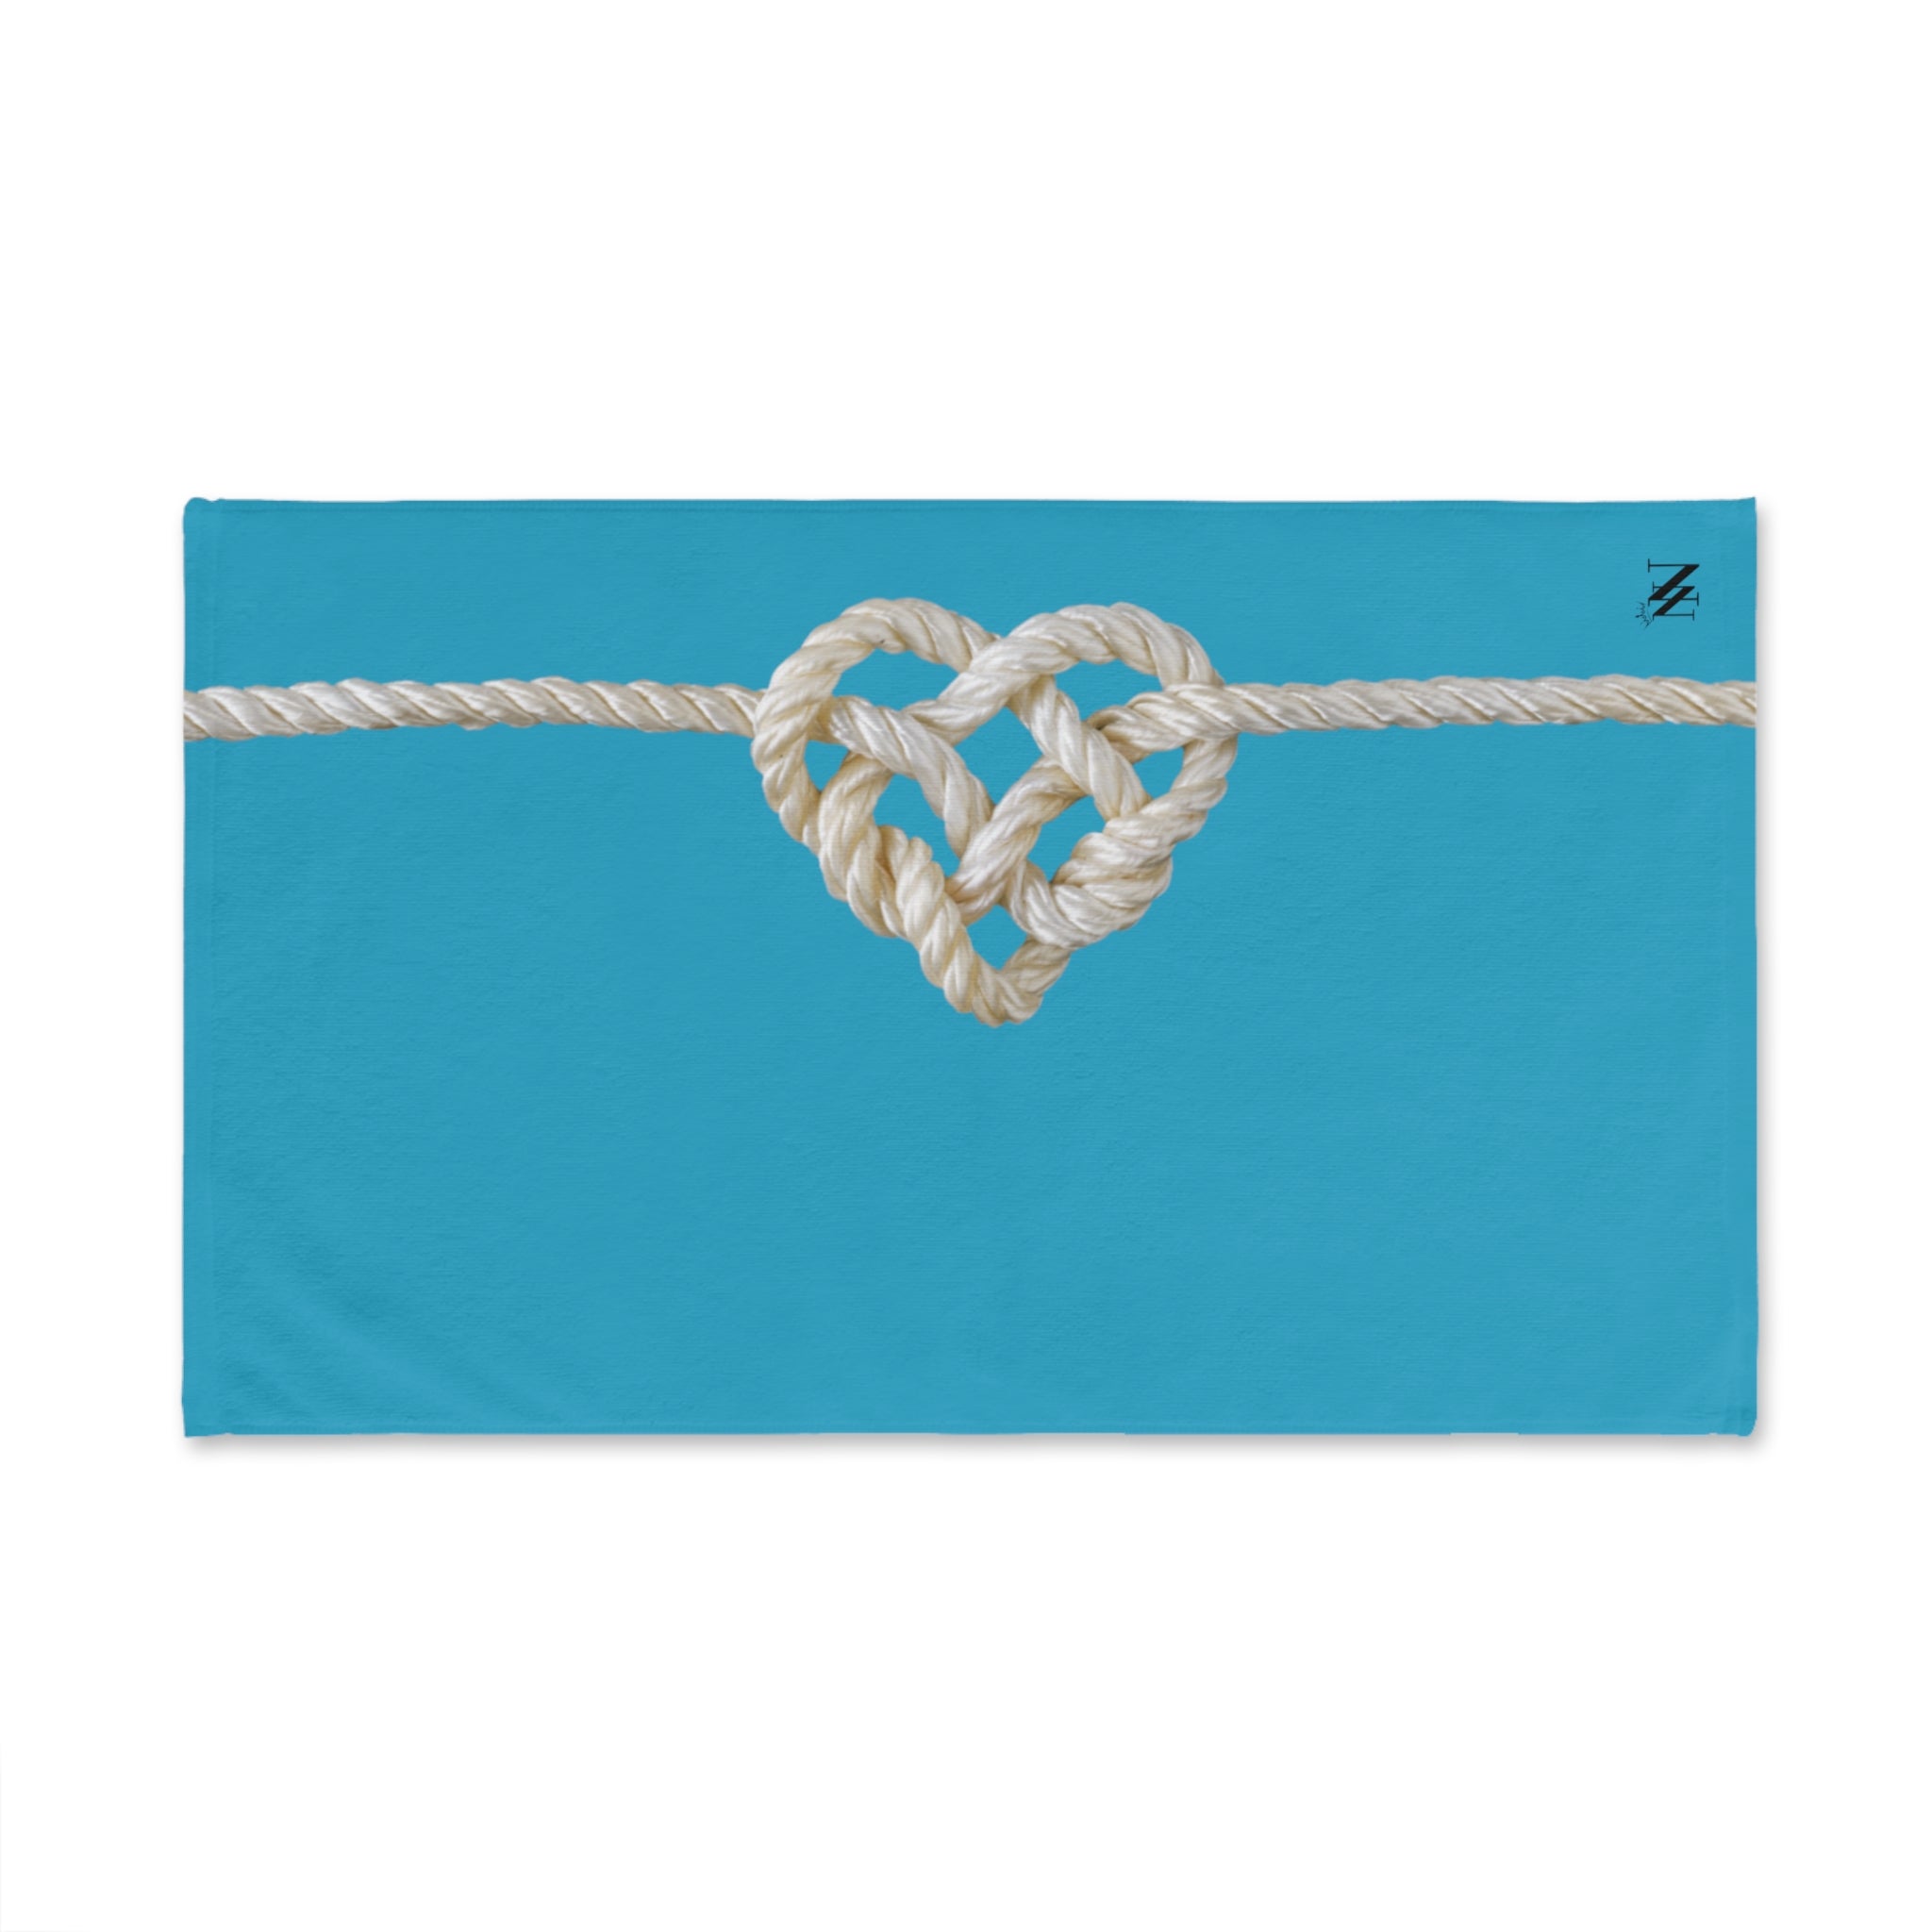 Heart Knot Teal | Novelty Gifts for Boyfriend, Funny Towel Romantic Gift for Wedding Couple Fiance First Year Anniversary Valentines, Party Gag Gifts, Joke Humor Cloth for Husband Men BF NECTAR NAPKINS